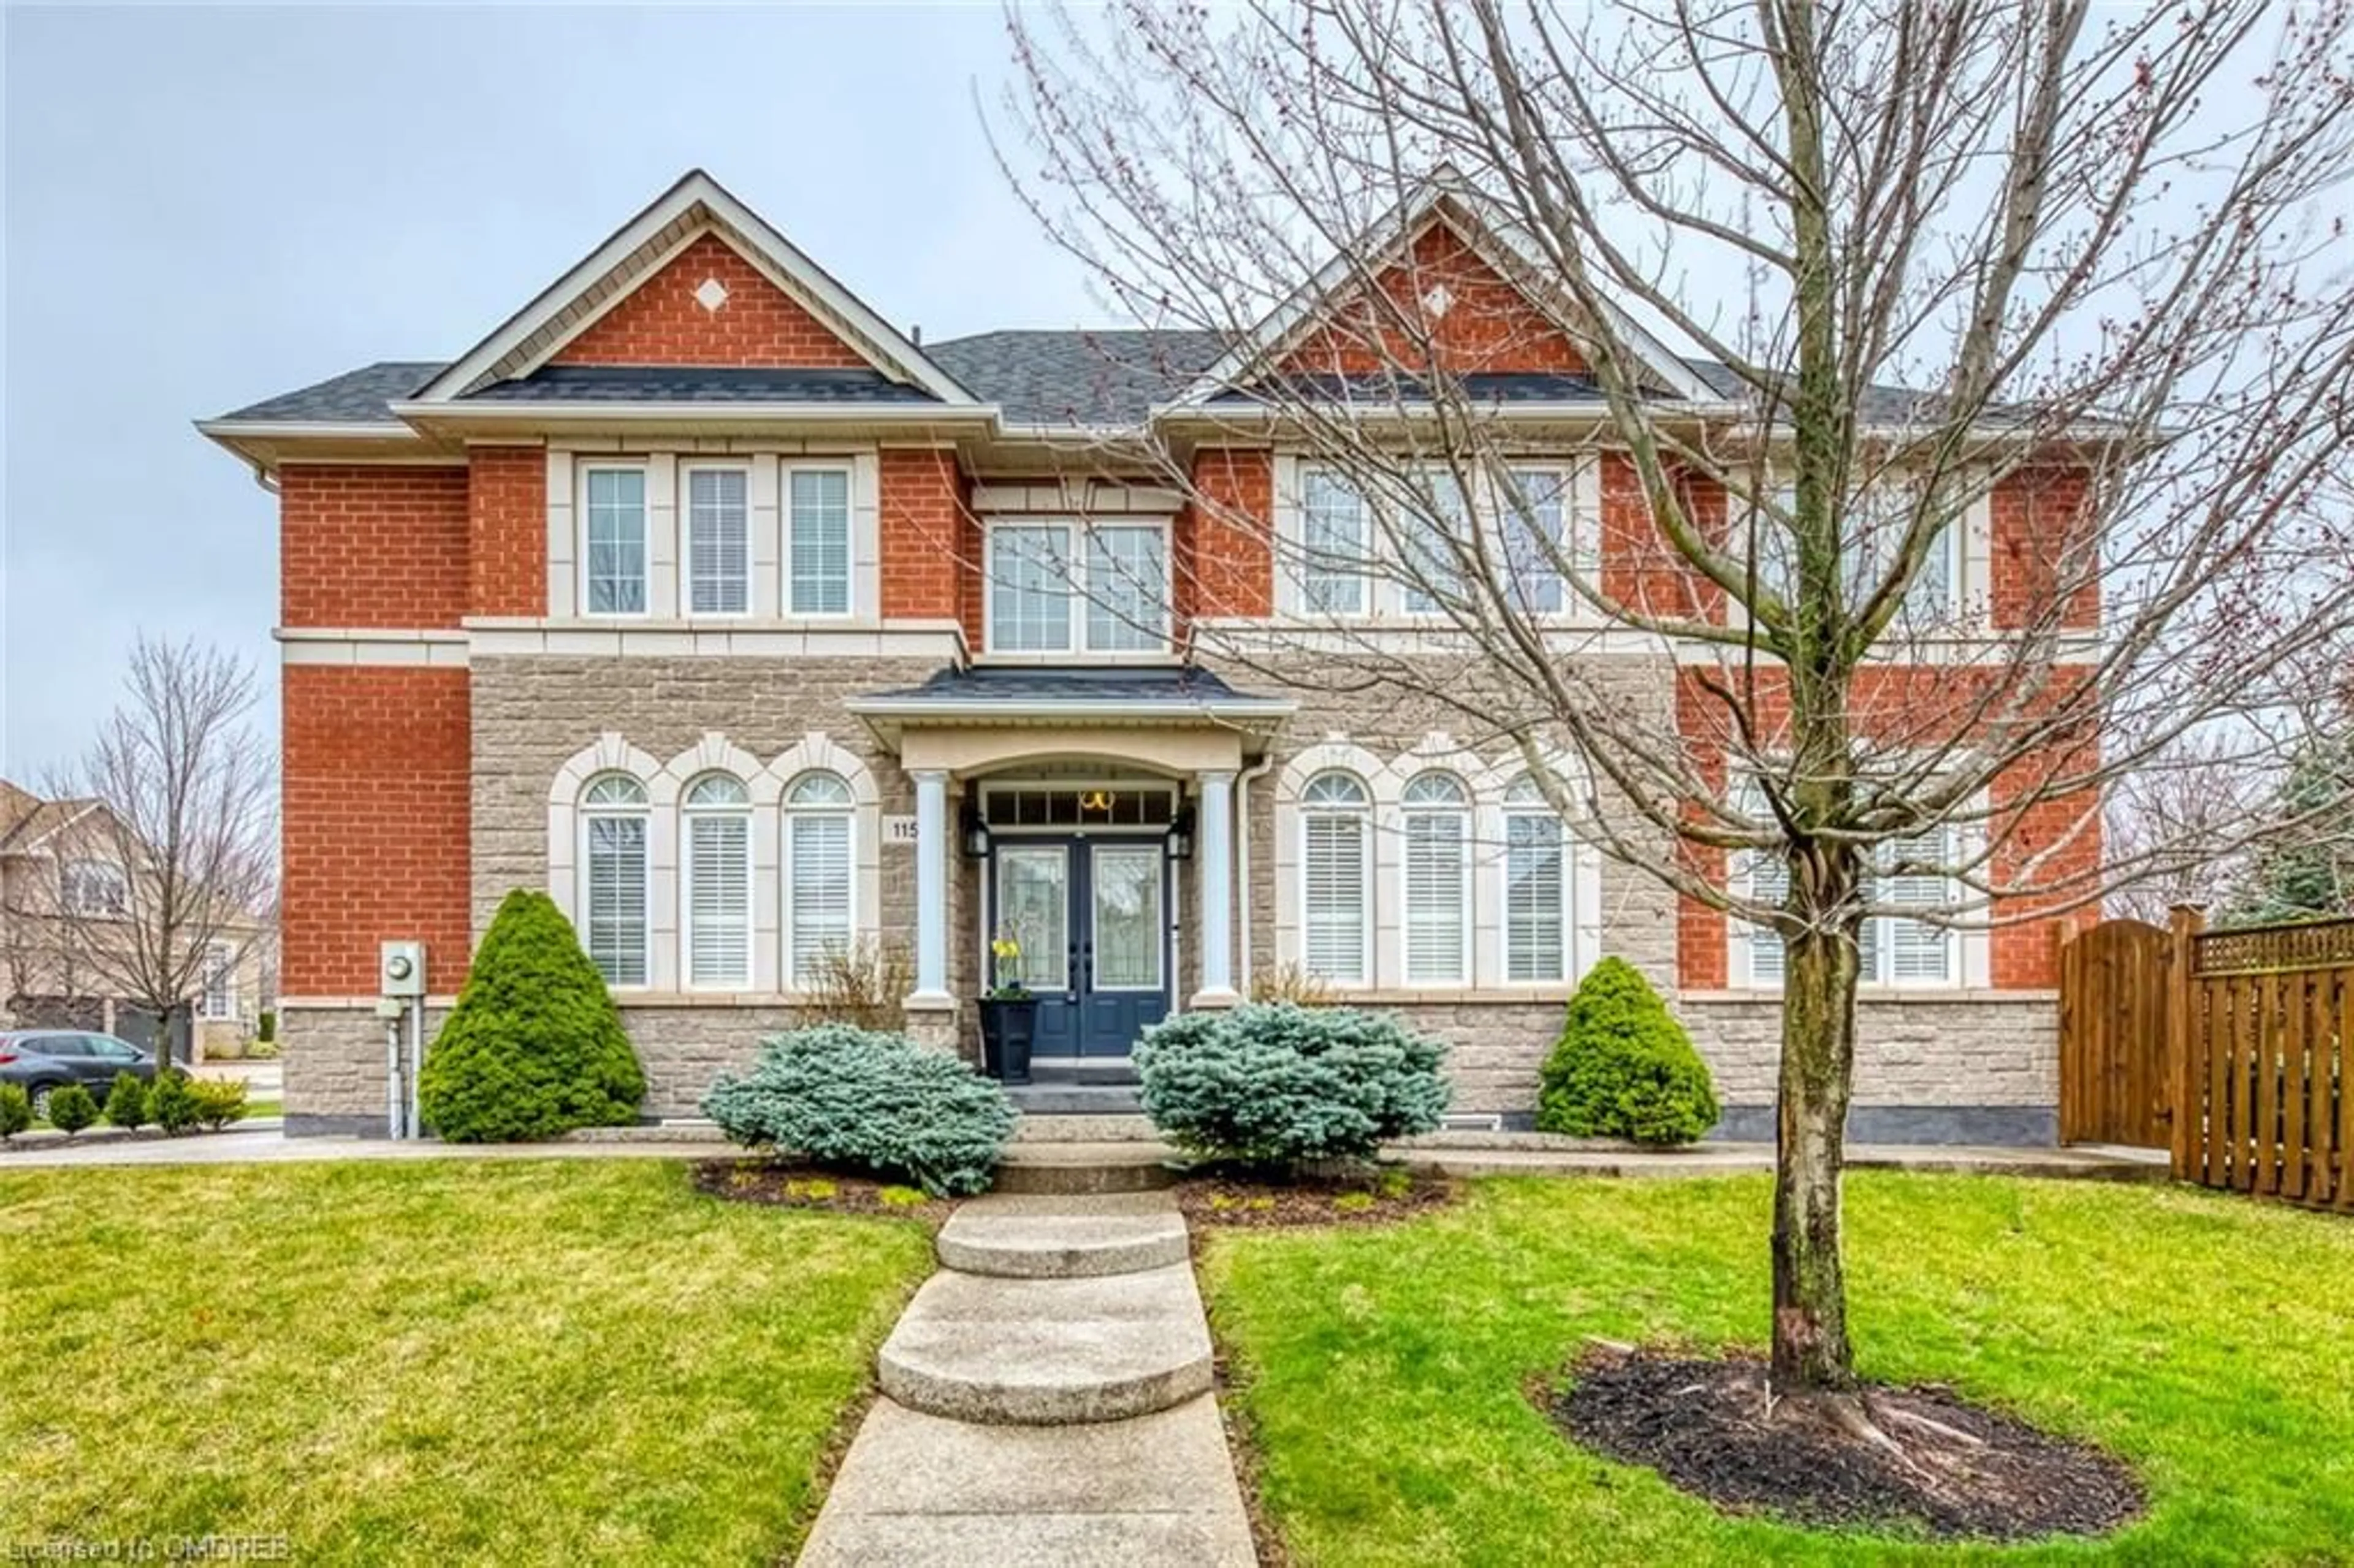 Home with brick exterior material for 1154 Kestell Blvd, Oakville Ontario L6H 7M7